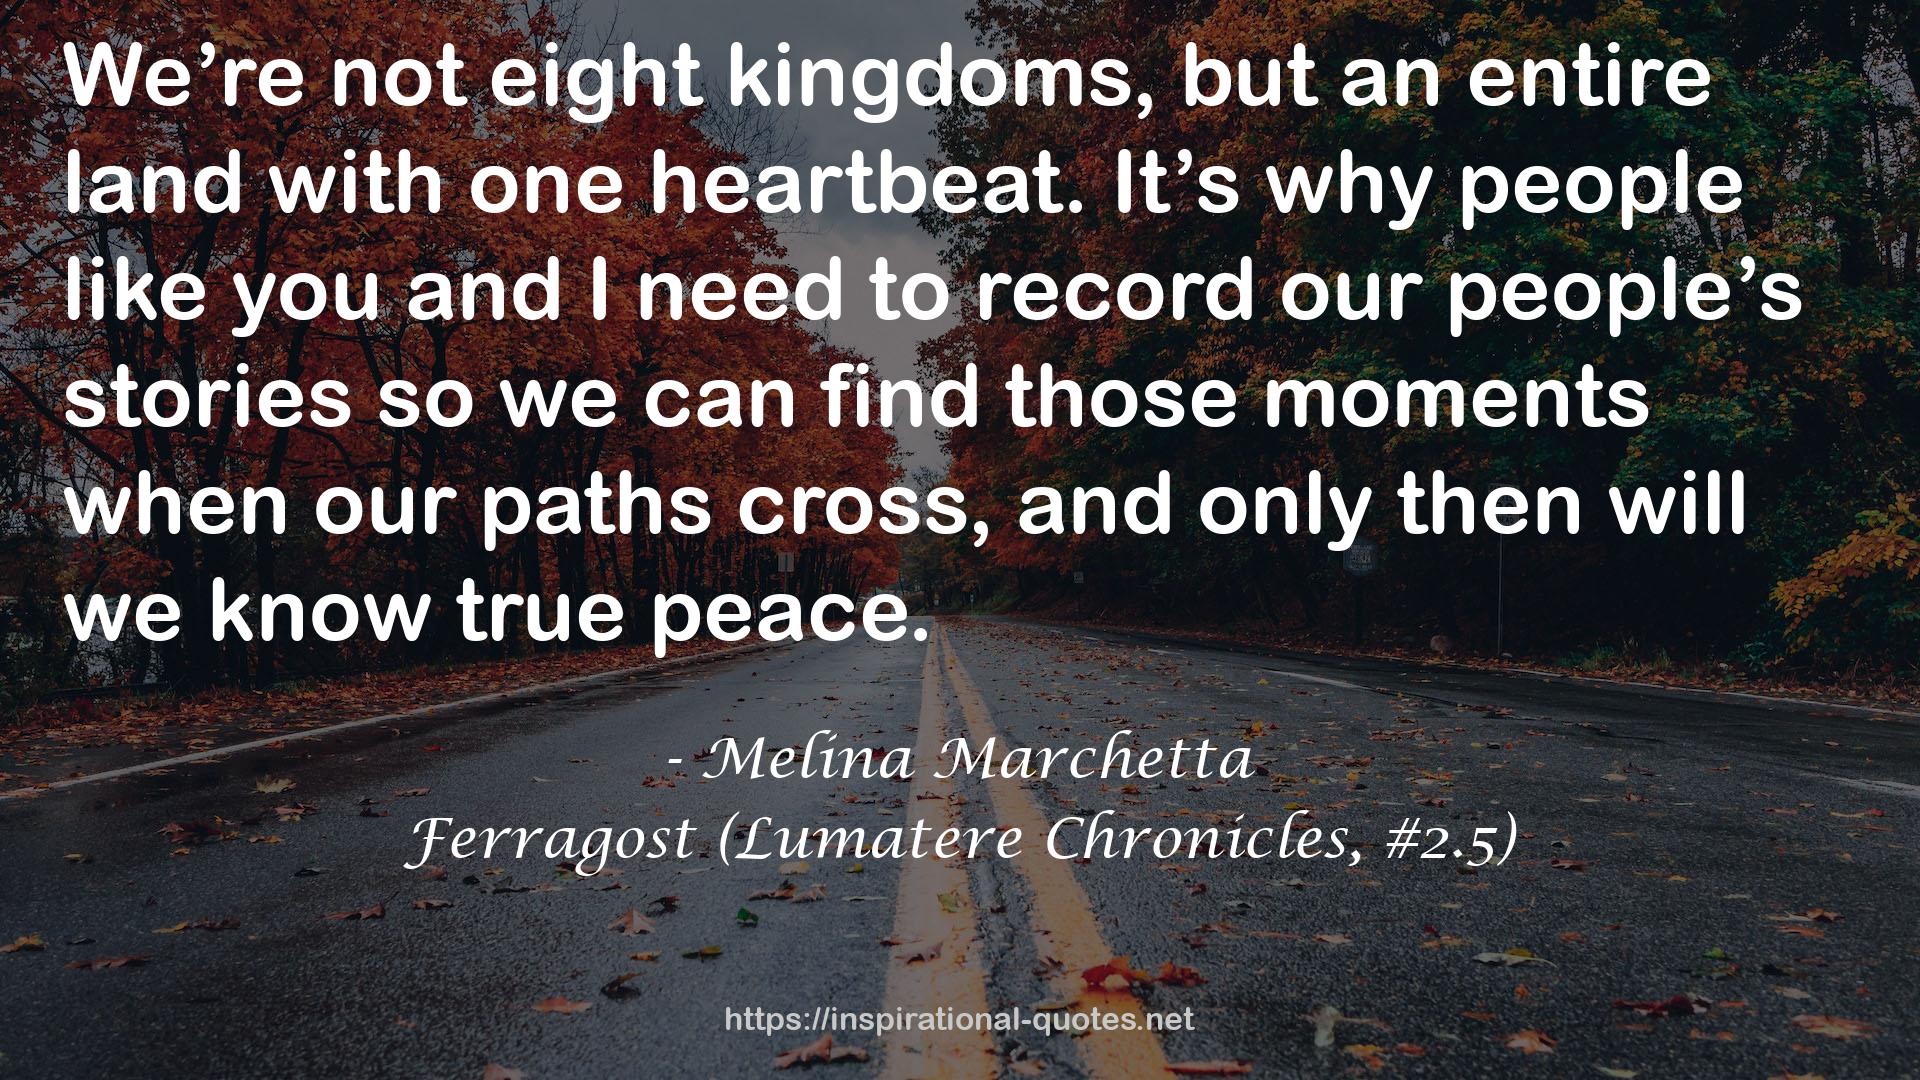 Ferragost (Lumatere Chronicles, #2.5) QUOTES